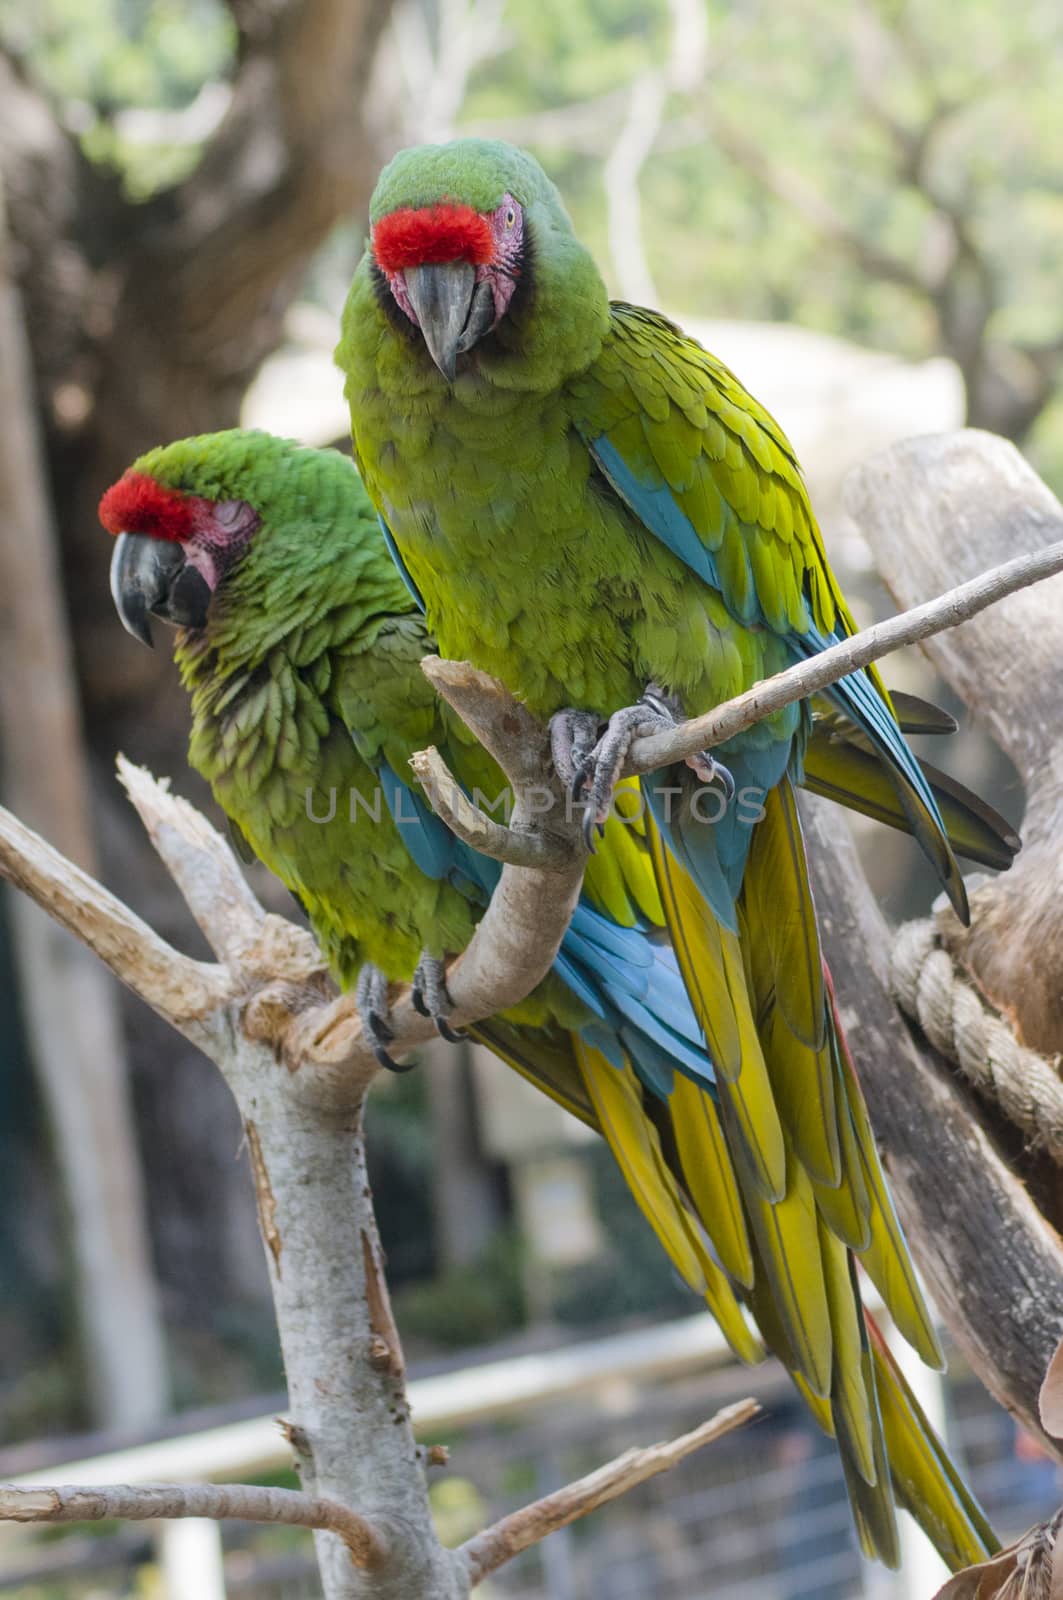 Parrots at Zoo by Njean